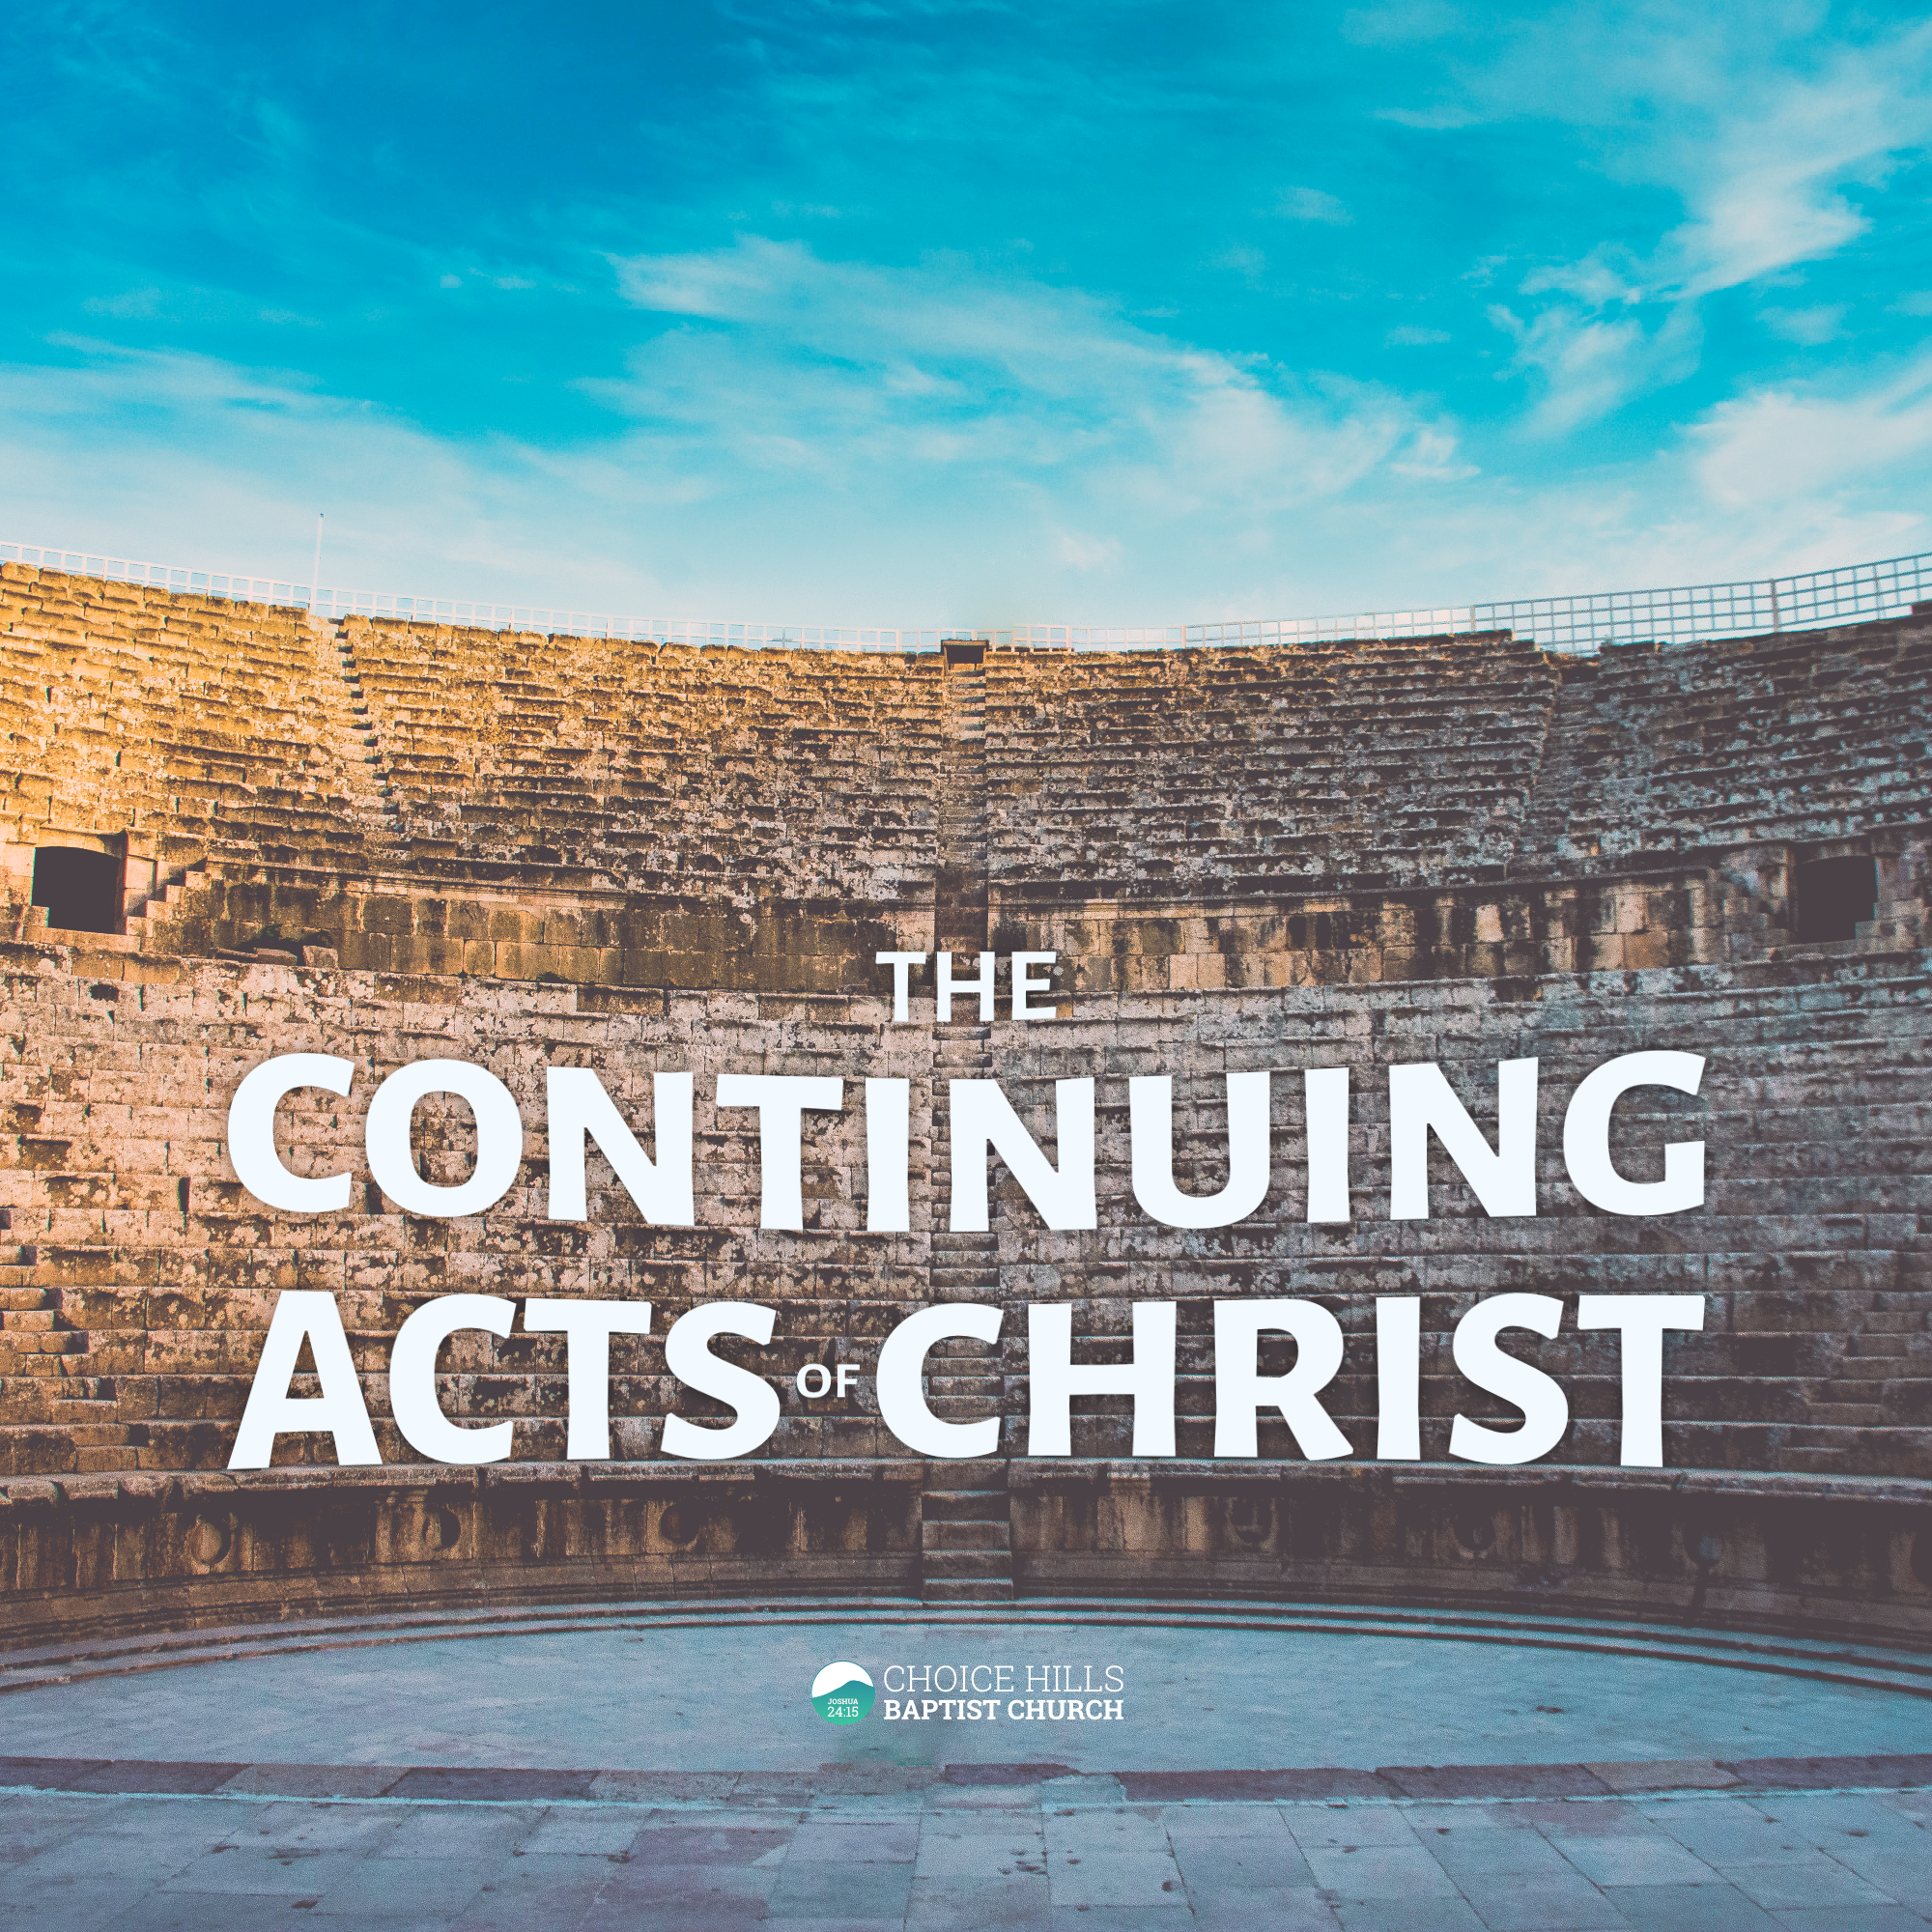 A Description of the First Church: The Continuing Acts of Christ—A Study of the Book of Acts